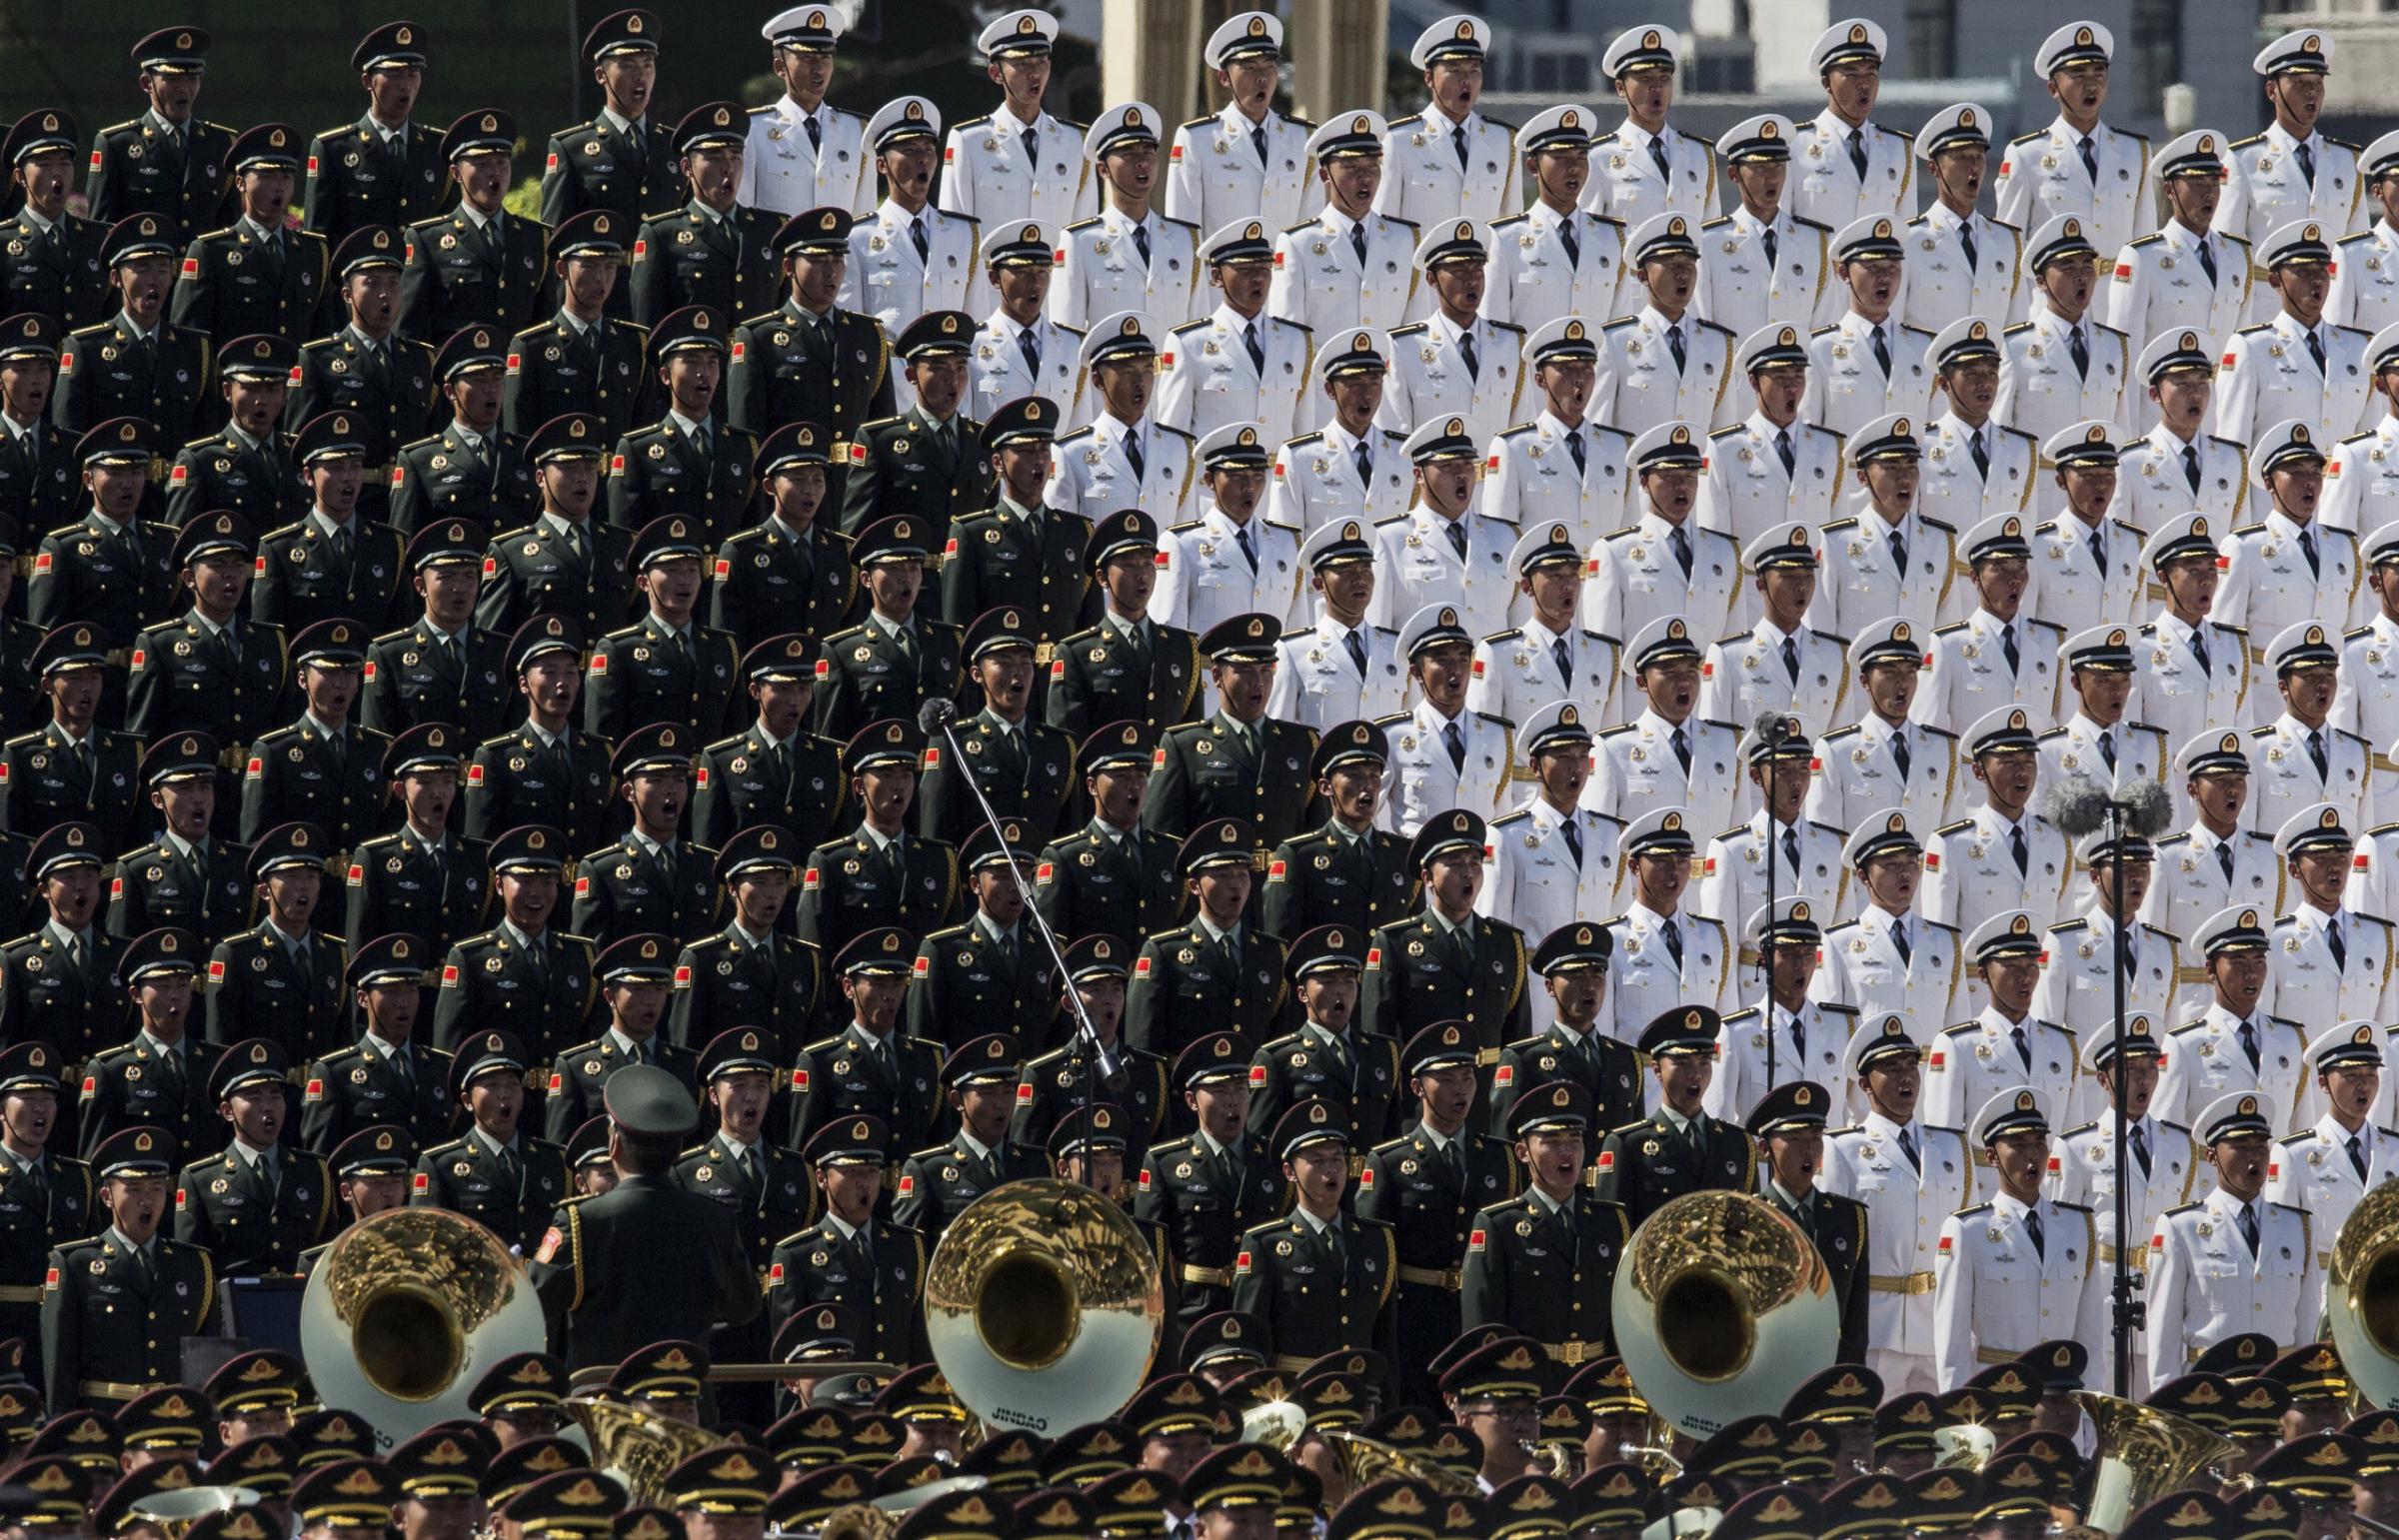 BEIJING, CHINA - SEPTEMBER 03: Members of a Chinese military choir sing near Tiananmen Square and the Forbidden City during a military parade on September 3, 2015 in Beijing, China. China is marking the 70th anniversary of the end of World War II and its role in defeating Japan with a new national holiday and a military parade in Beijing. (Photo by Kevin Frayer/Getty Images)